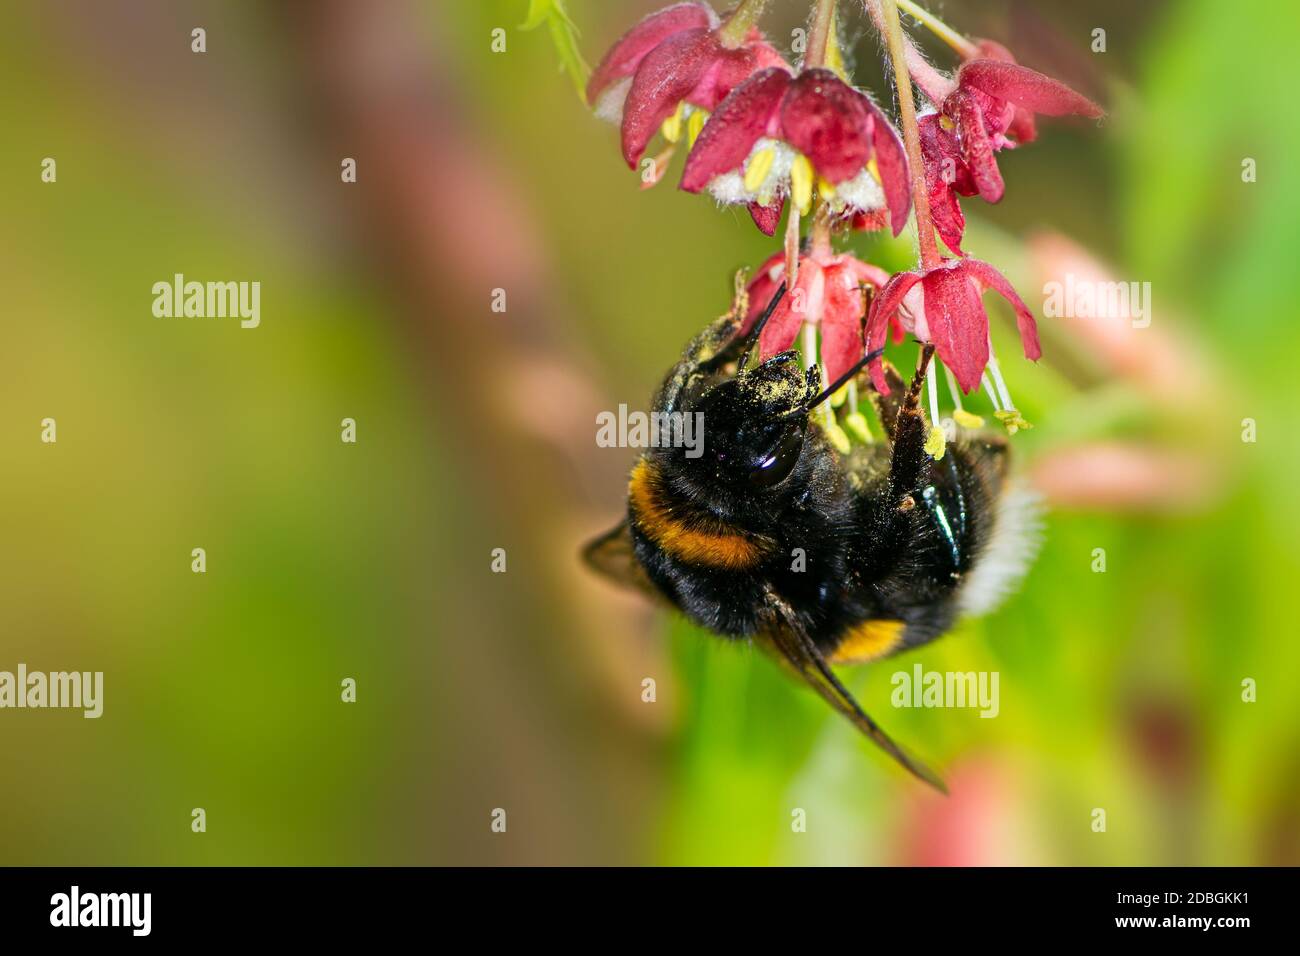 Macro of a Northern white-tailed bumblebee (Bombus magnus) at the blossoms of a japanese maple tree Stock Photo